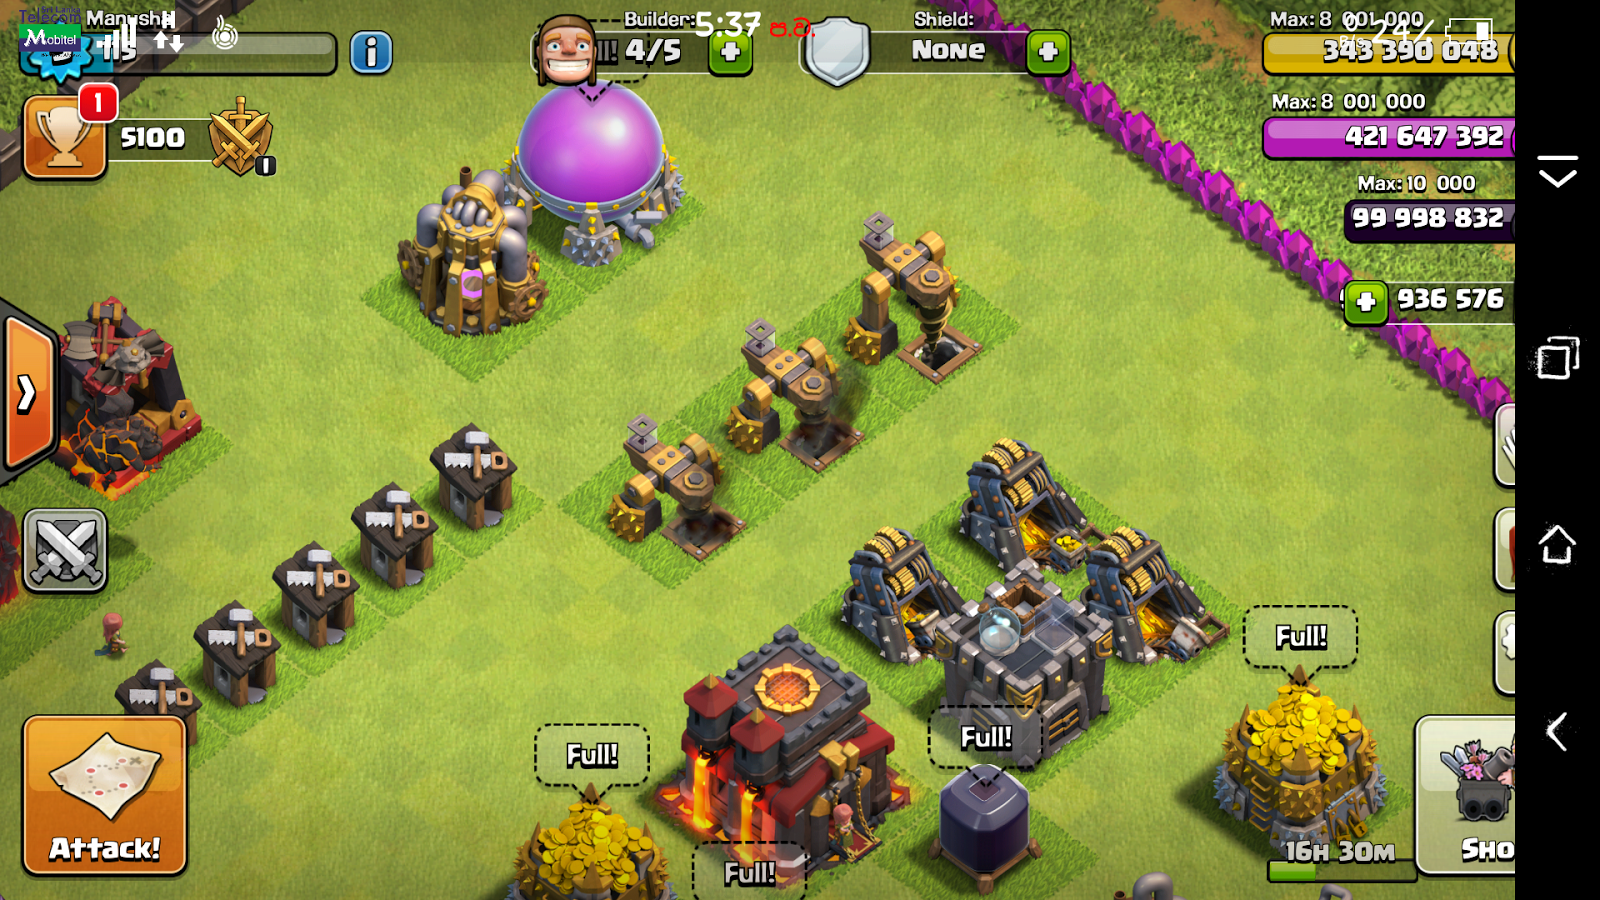 tell me games like clash of clans for android